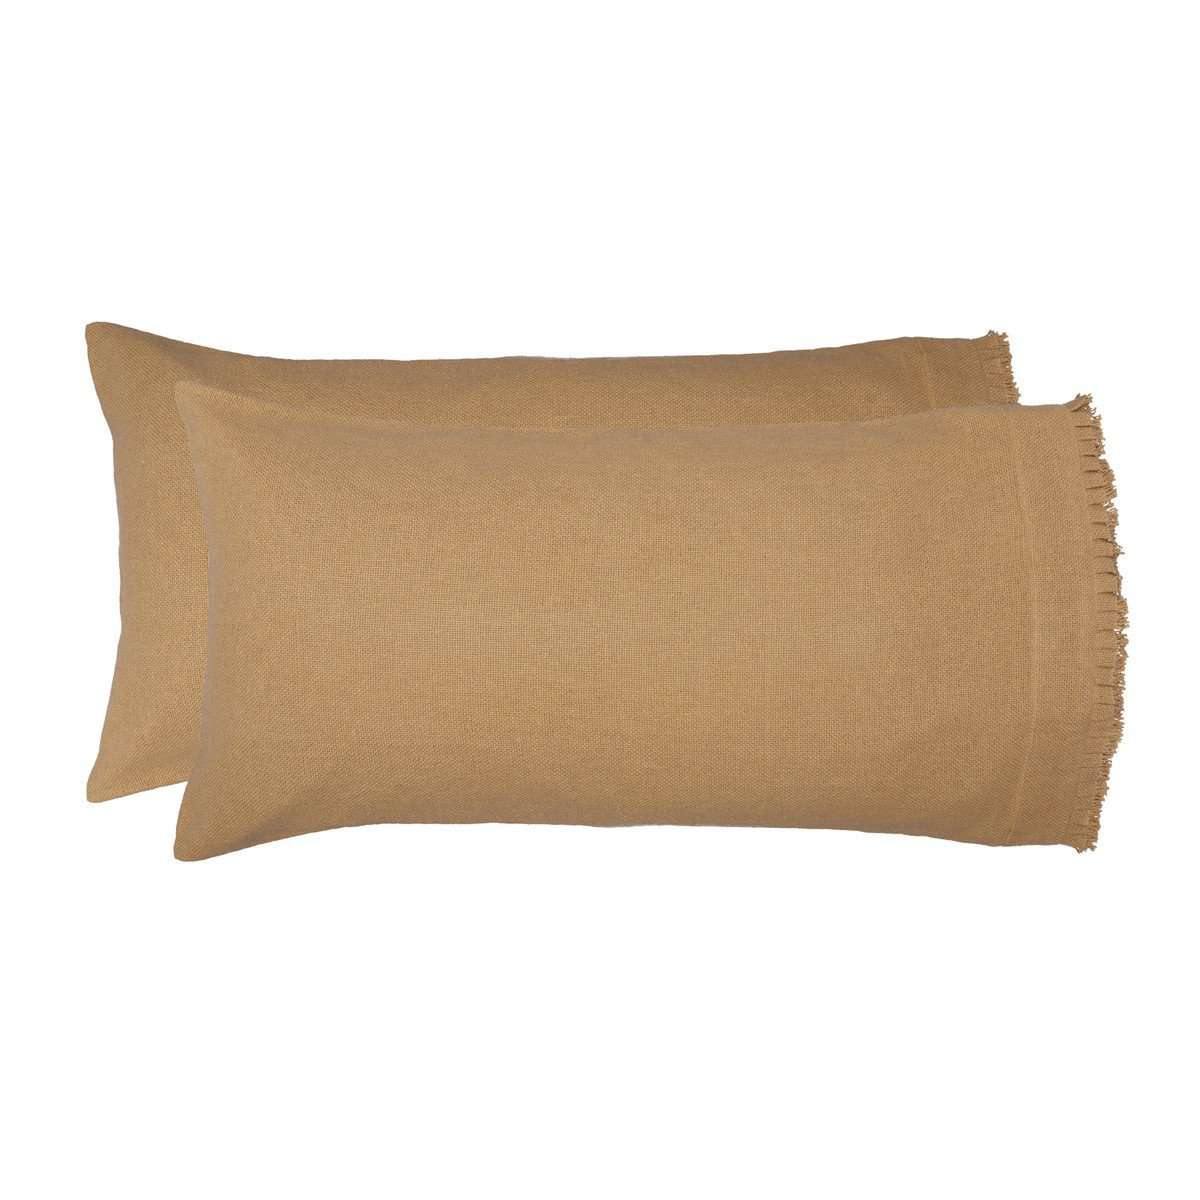 Burlap Natural King Pillow Case w/ Fringed Ruffle Set of 2 21x40 VHC Brands - The Fox Decor